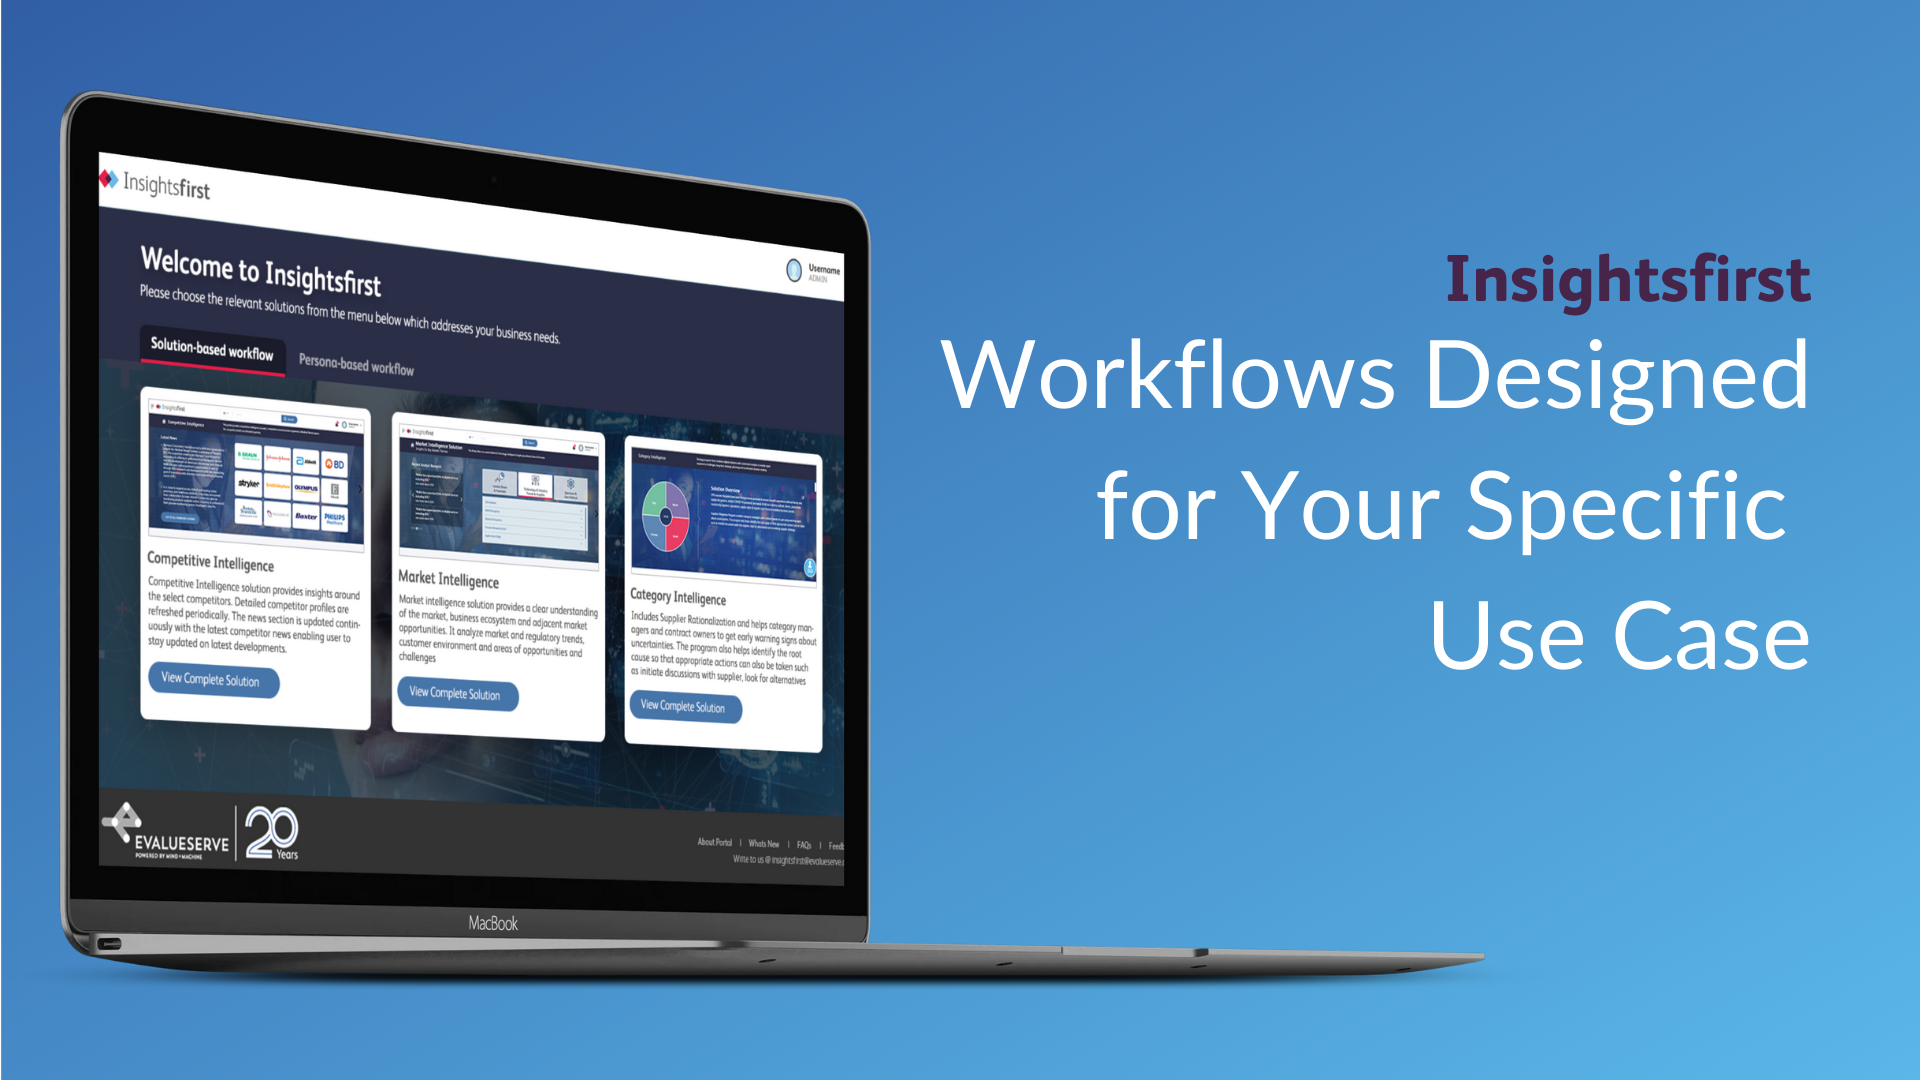 Insightsfirst: Workflows Designed for Your Specific Use Case